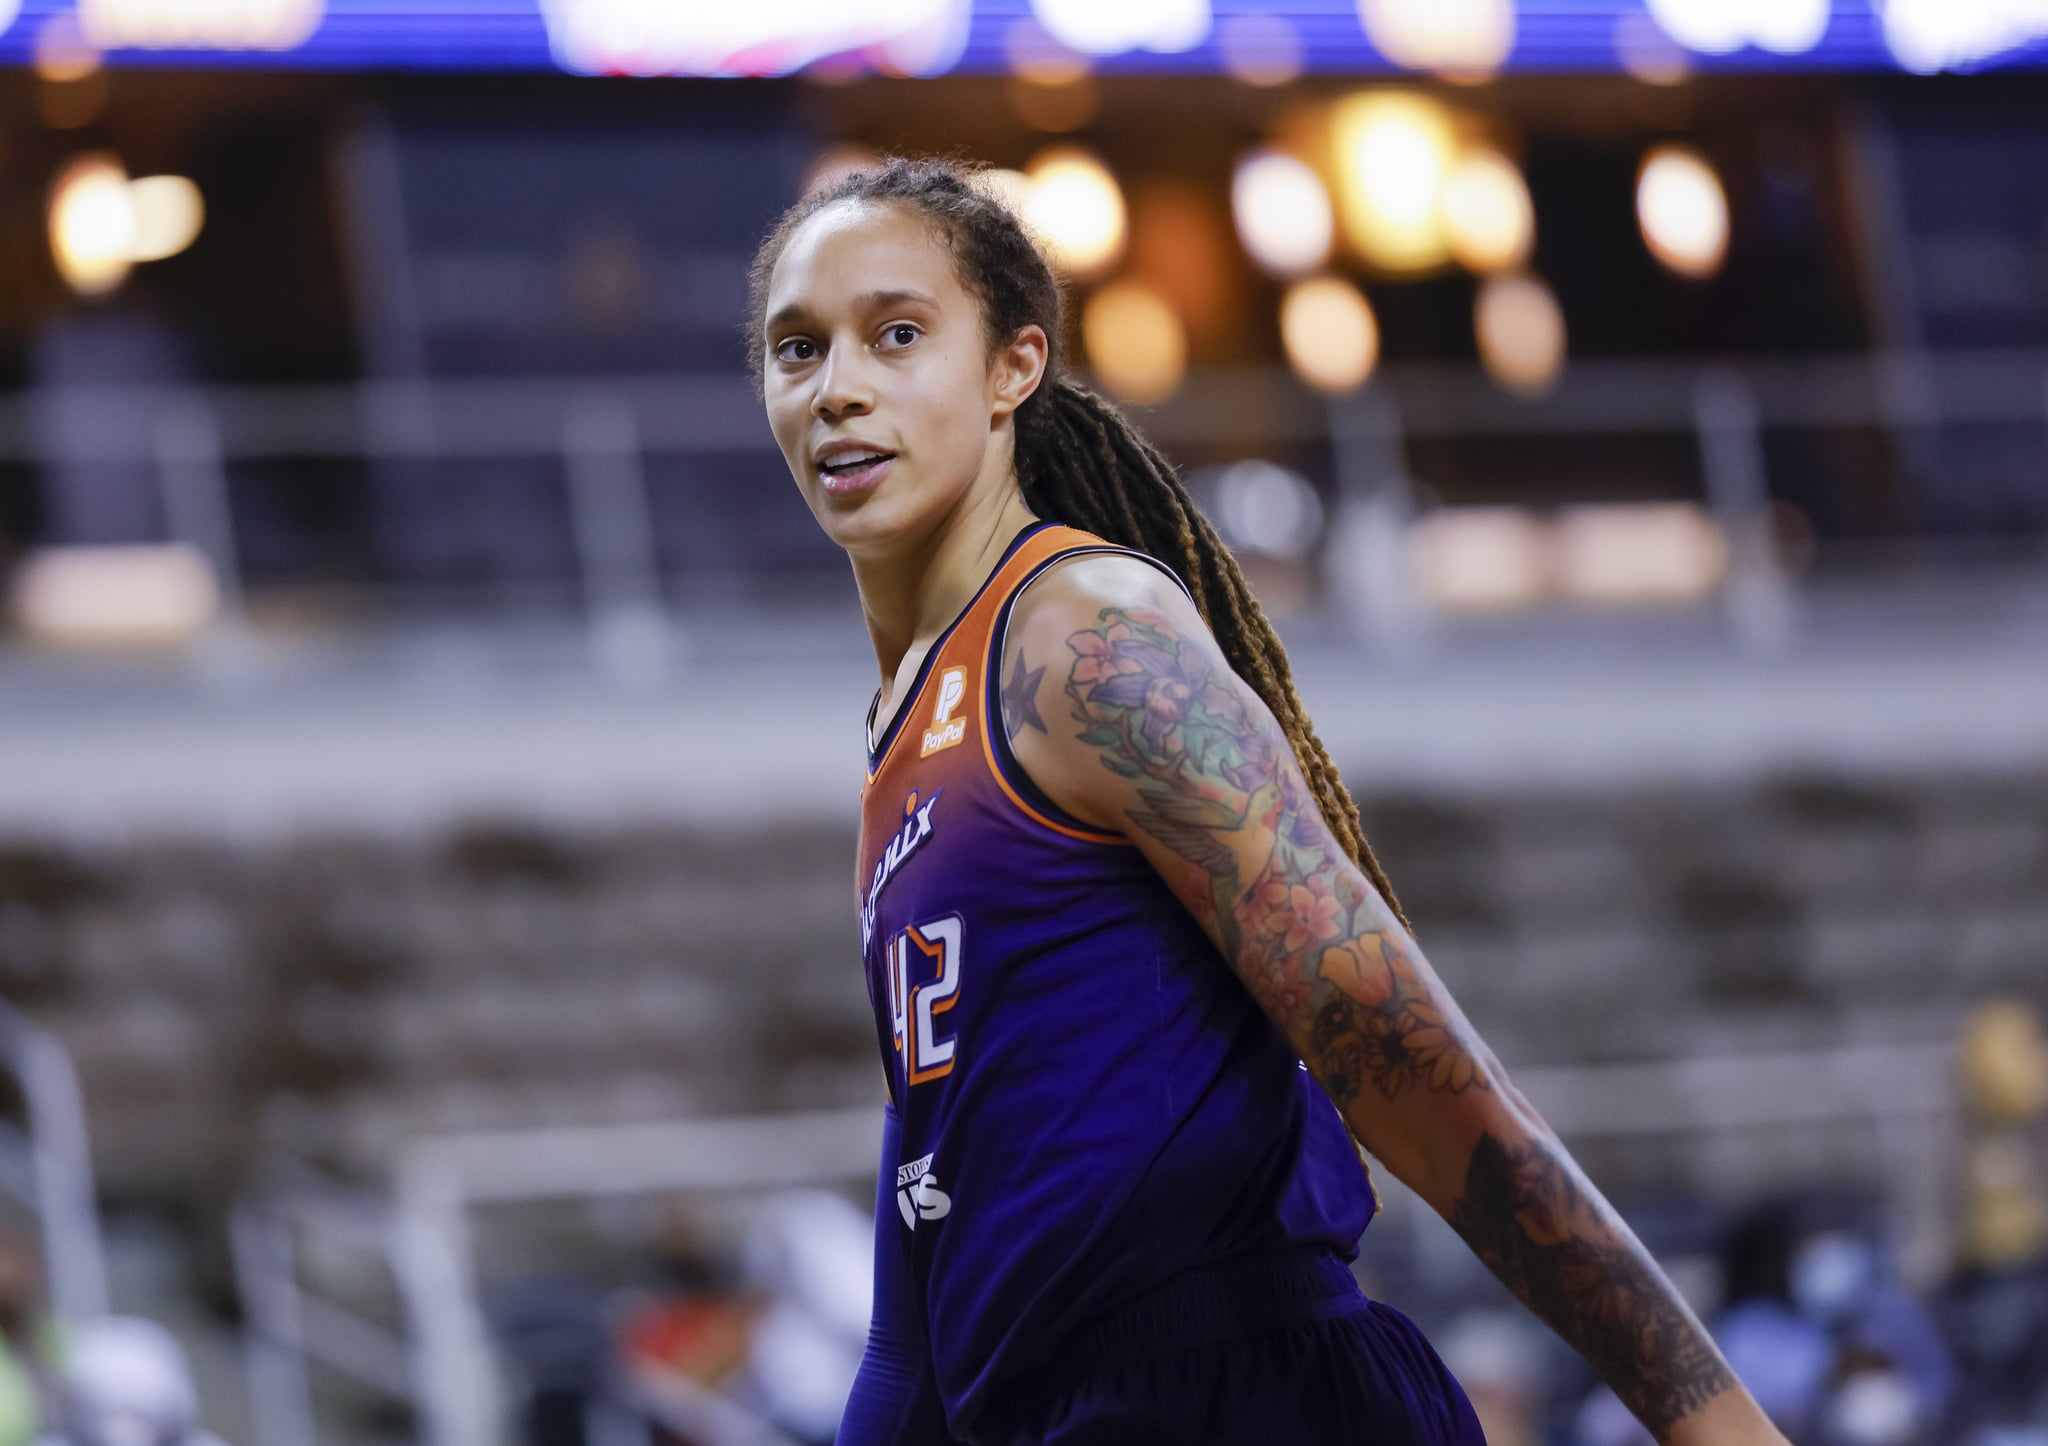 INDIANAPOLIS, IN - SEPTEMBER 06: Brittney Griner #42 of the Phoenix Mercury is seen during the game against the Indiana Fever at Indiana Farmers Coliseum on September 6, 2021 in Indianapolis, Indiana.  NOTICE TO USER: User expressly acknowledges and agrees that by downloading and/or using this photograph, the user agrees to the terms of the Getty Images License Agreement.  (Photo by Michael Hickey/Getty Images)